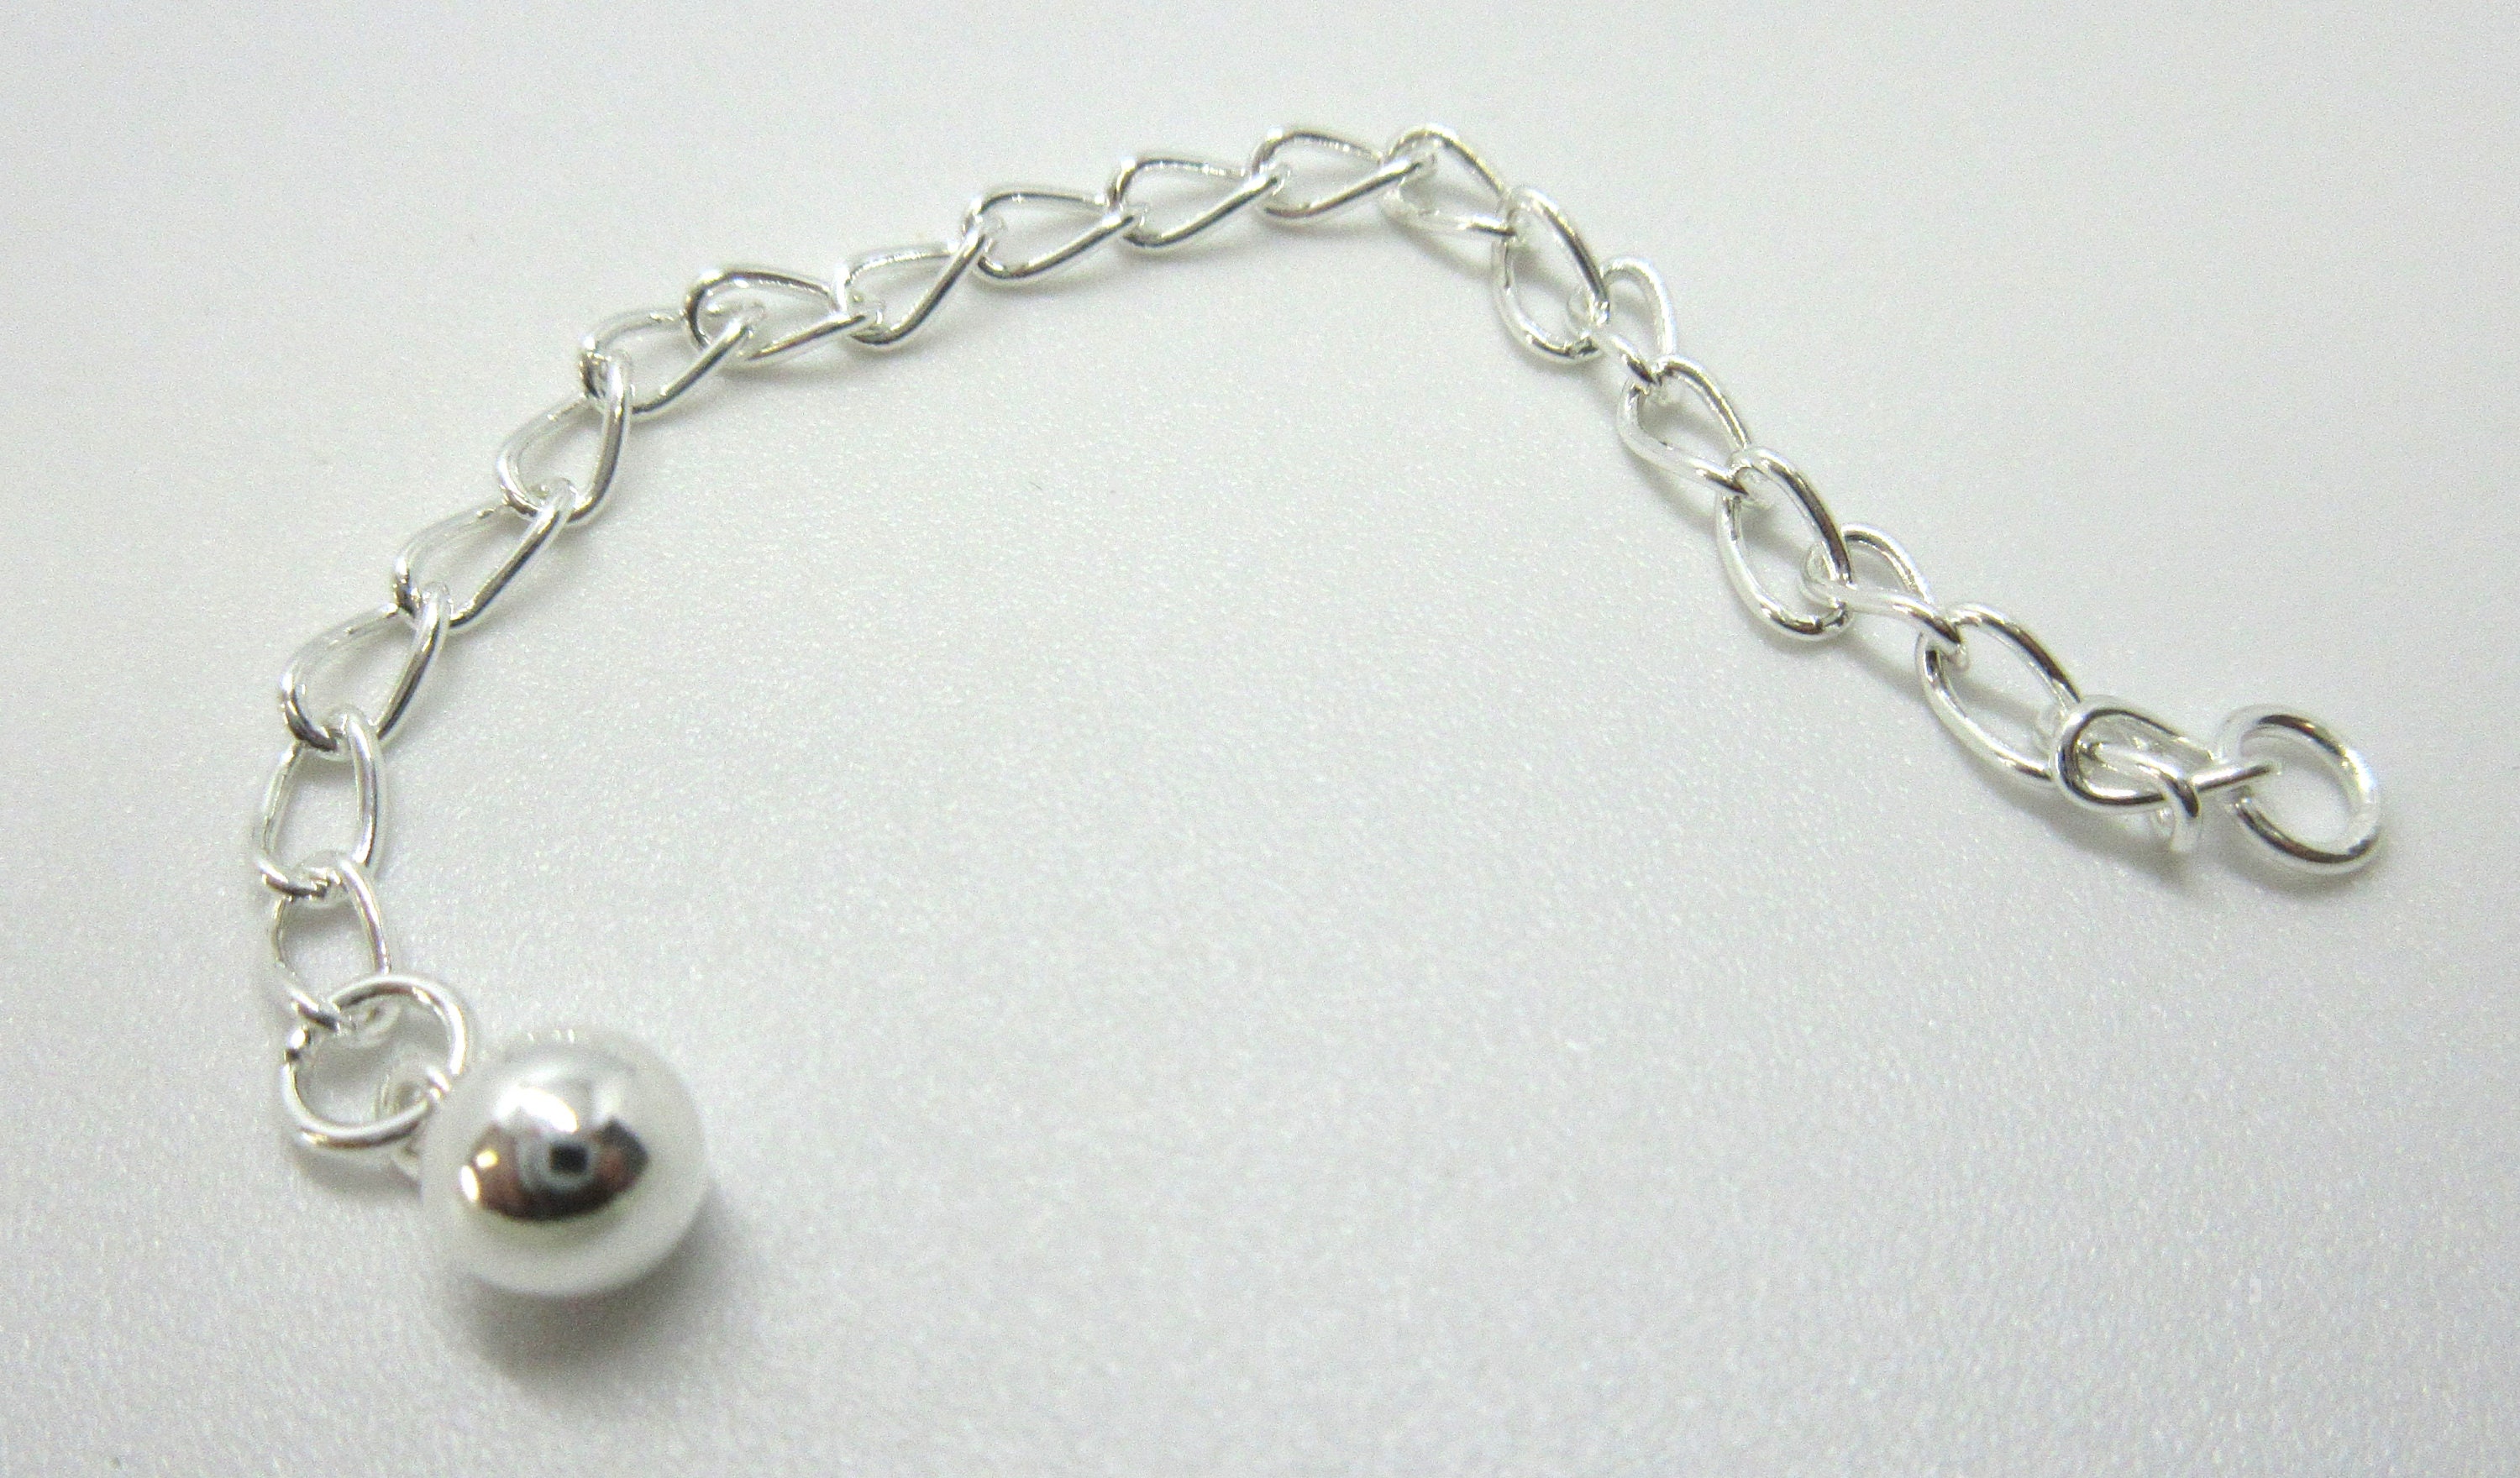 3 Necklace Chain Extender - 925 Sterling Silver - Ball on End Adjustable  Length